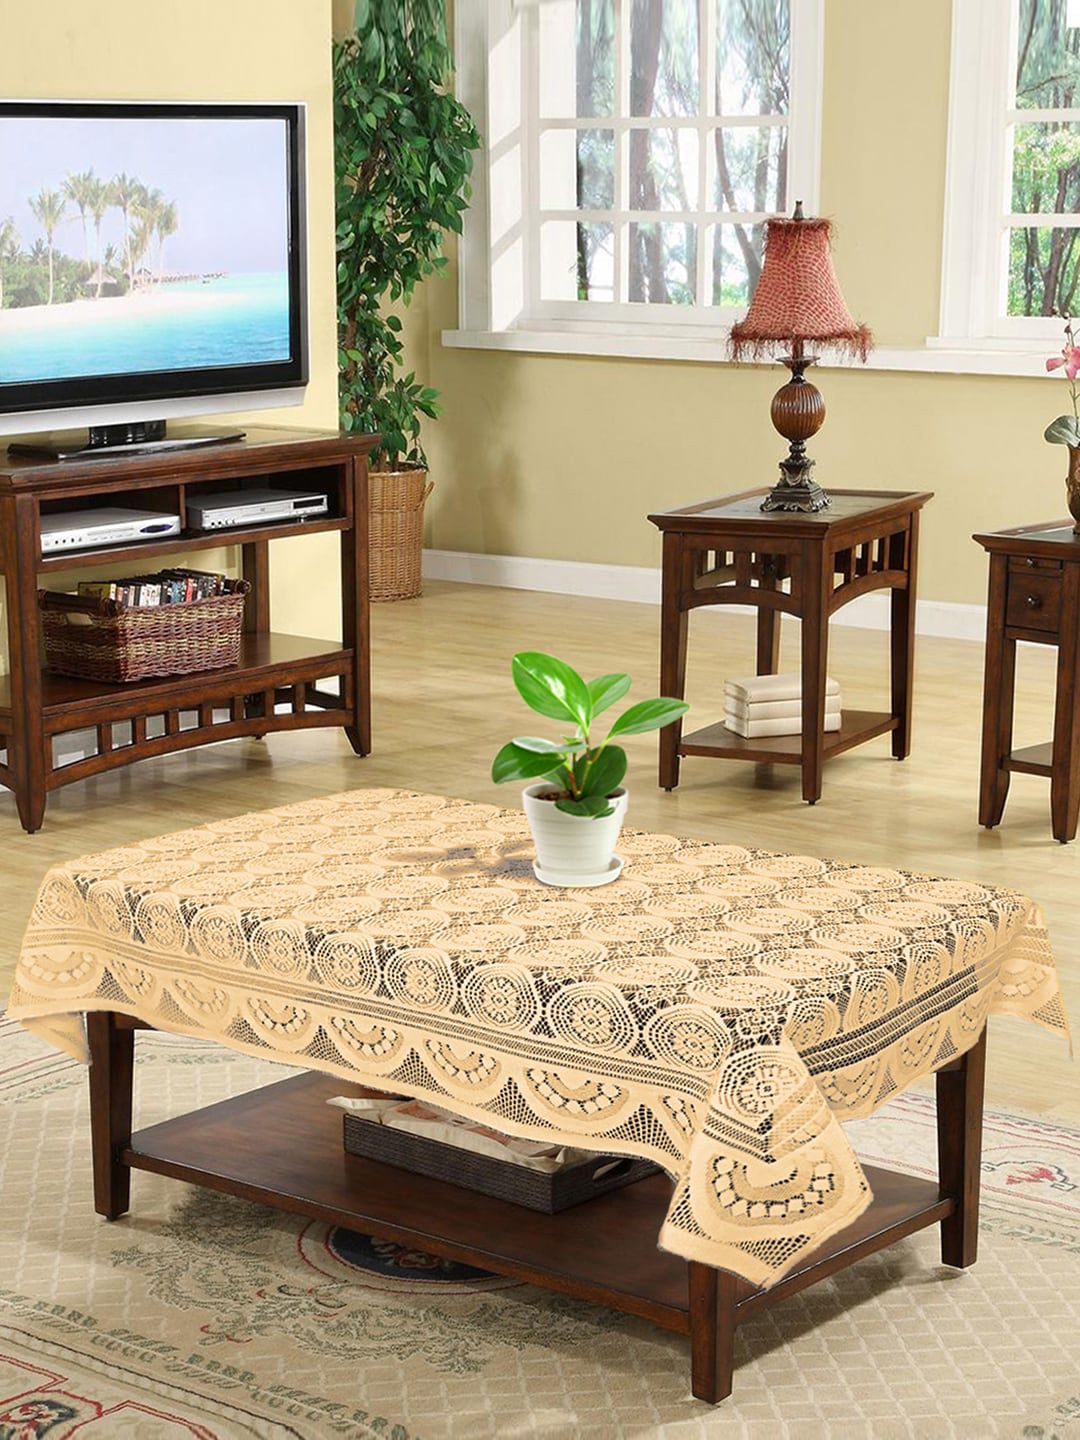 Kuber Industries Cream-Coloured Woven Design 4 Seater Cotton Table Cover Price in India